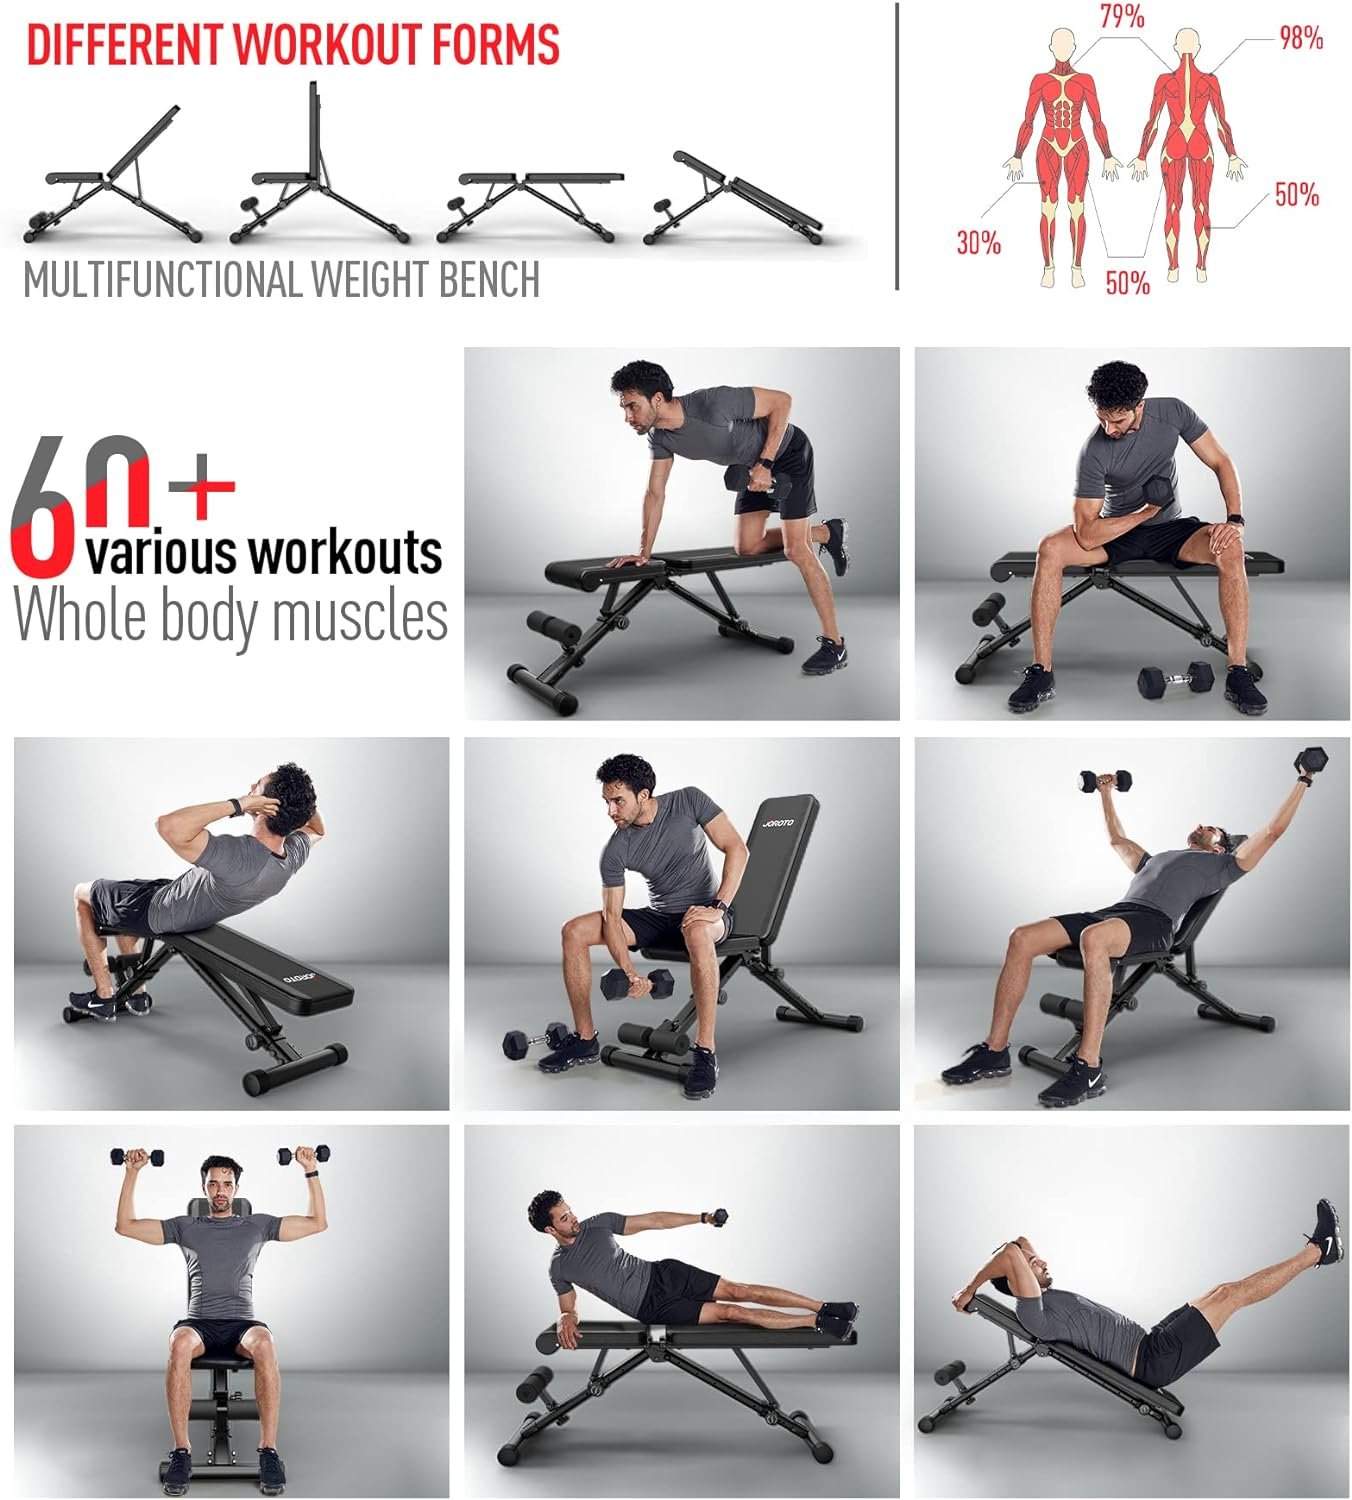 JOROTO MD35 Weight Bench Review